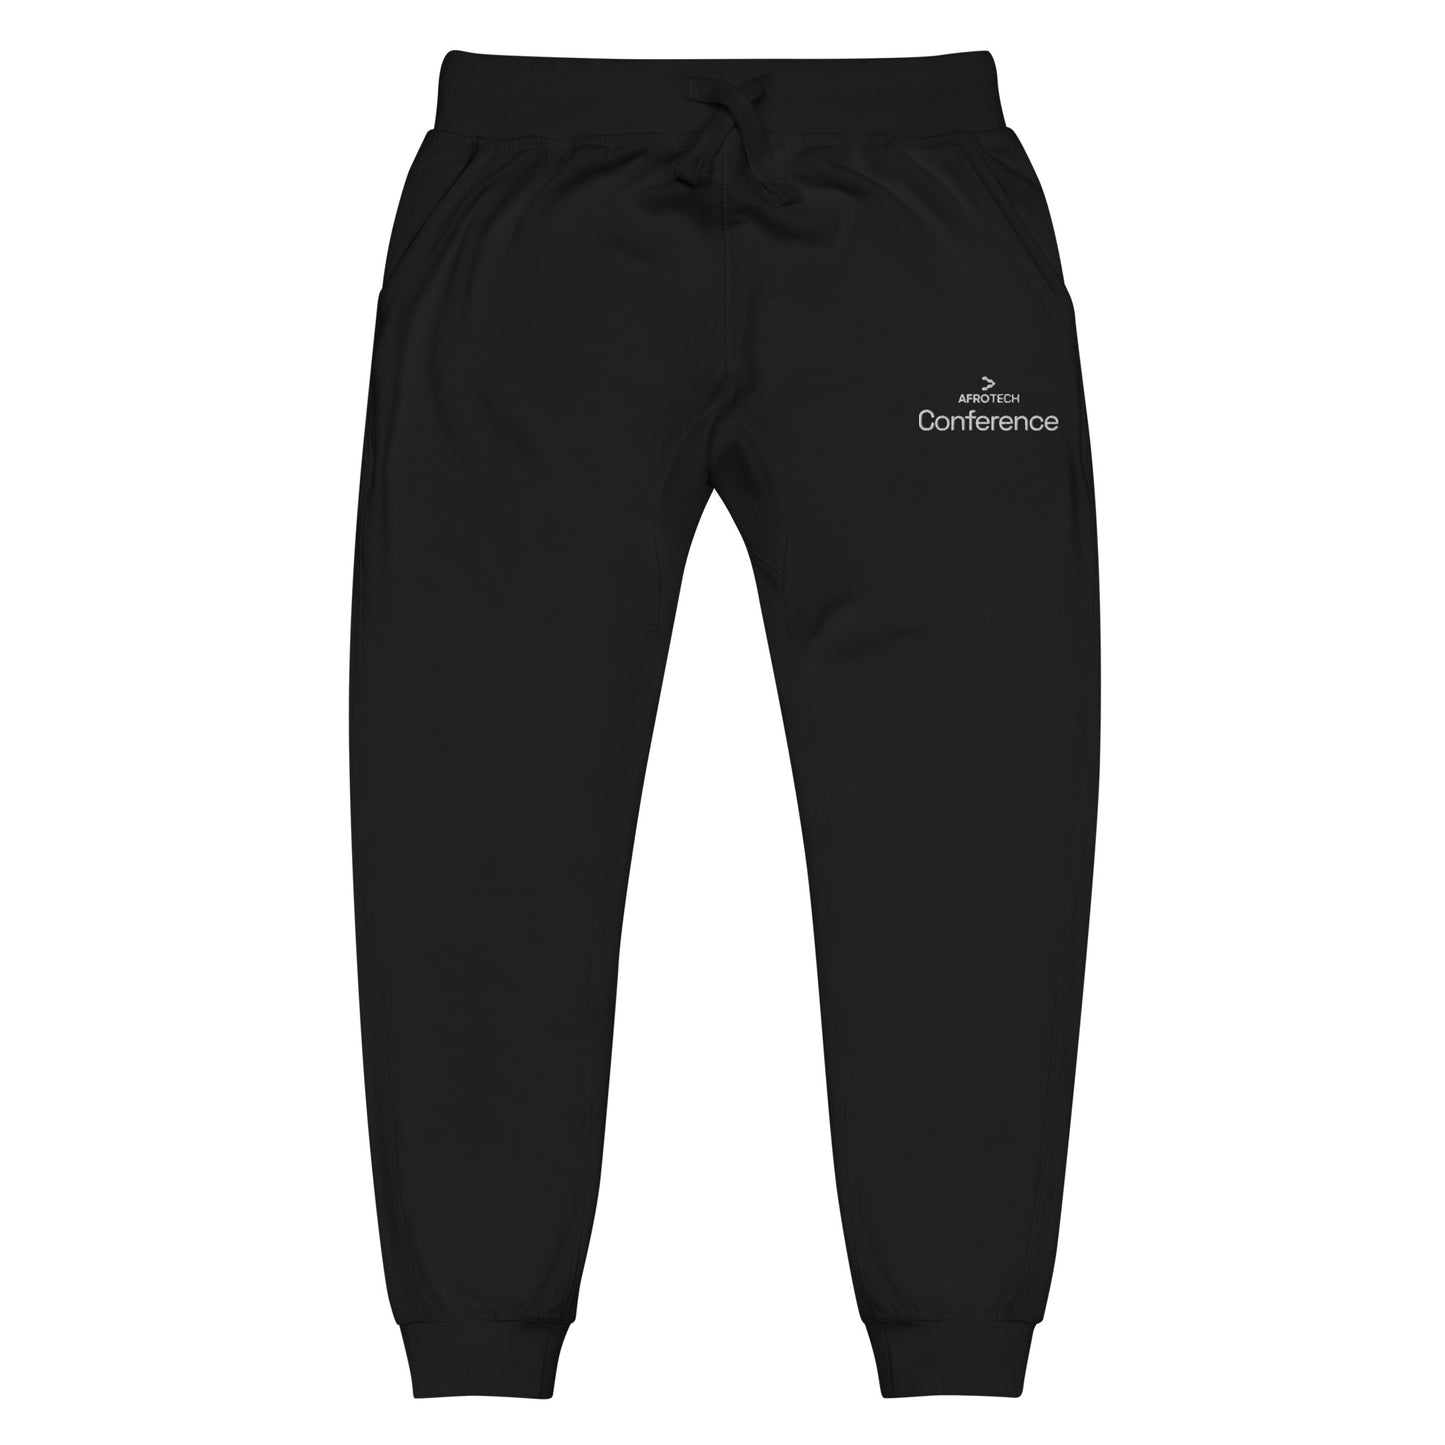 AFROTECH Conference sweatpants